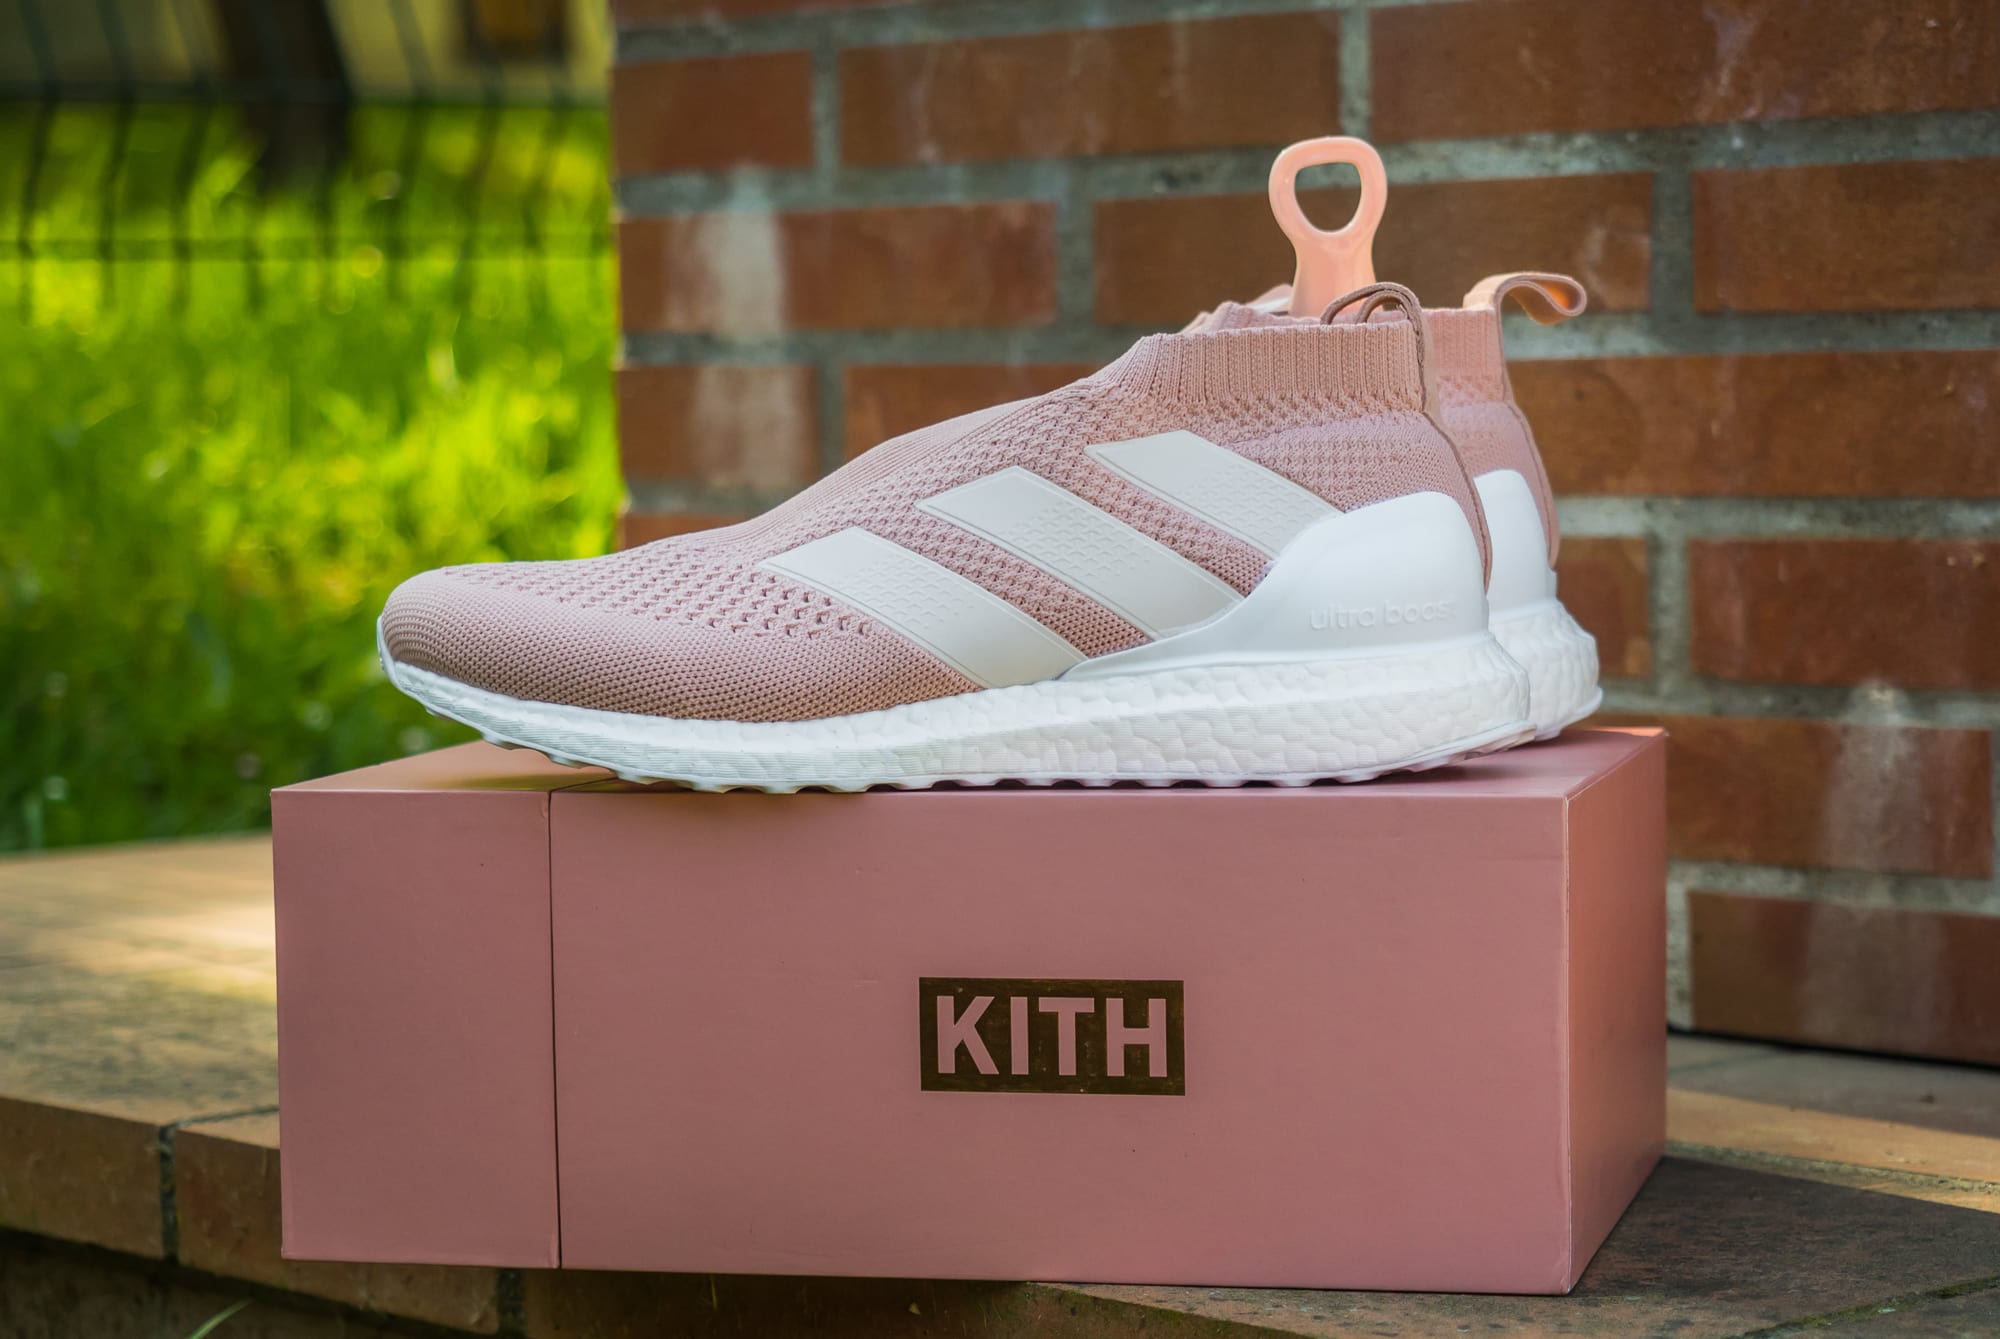 applaus Muildier Oxide Adidas and Kith reveal plans for a pink flamingo soccer capsule